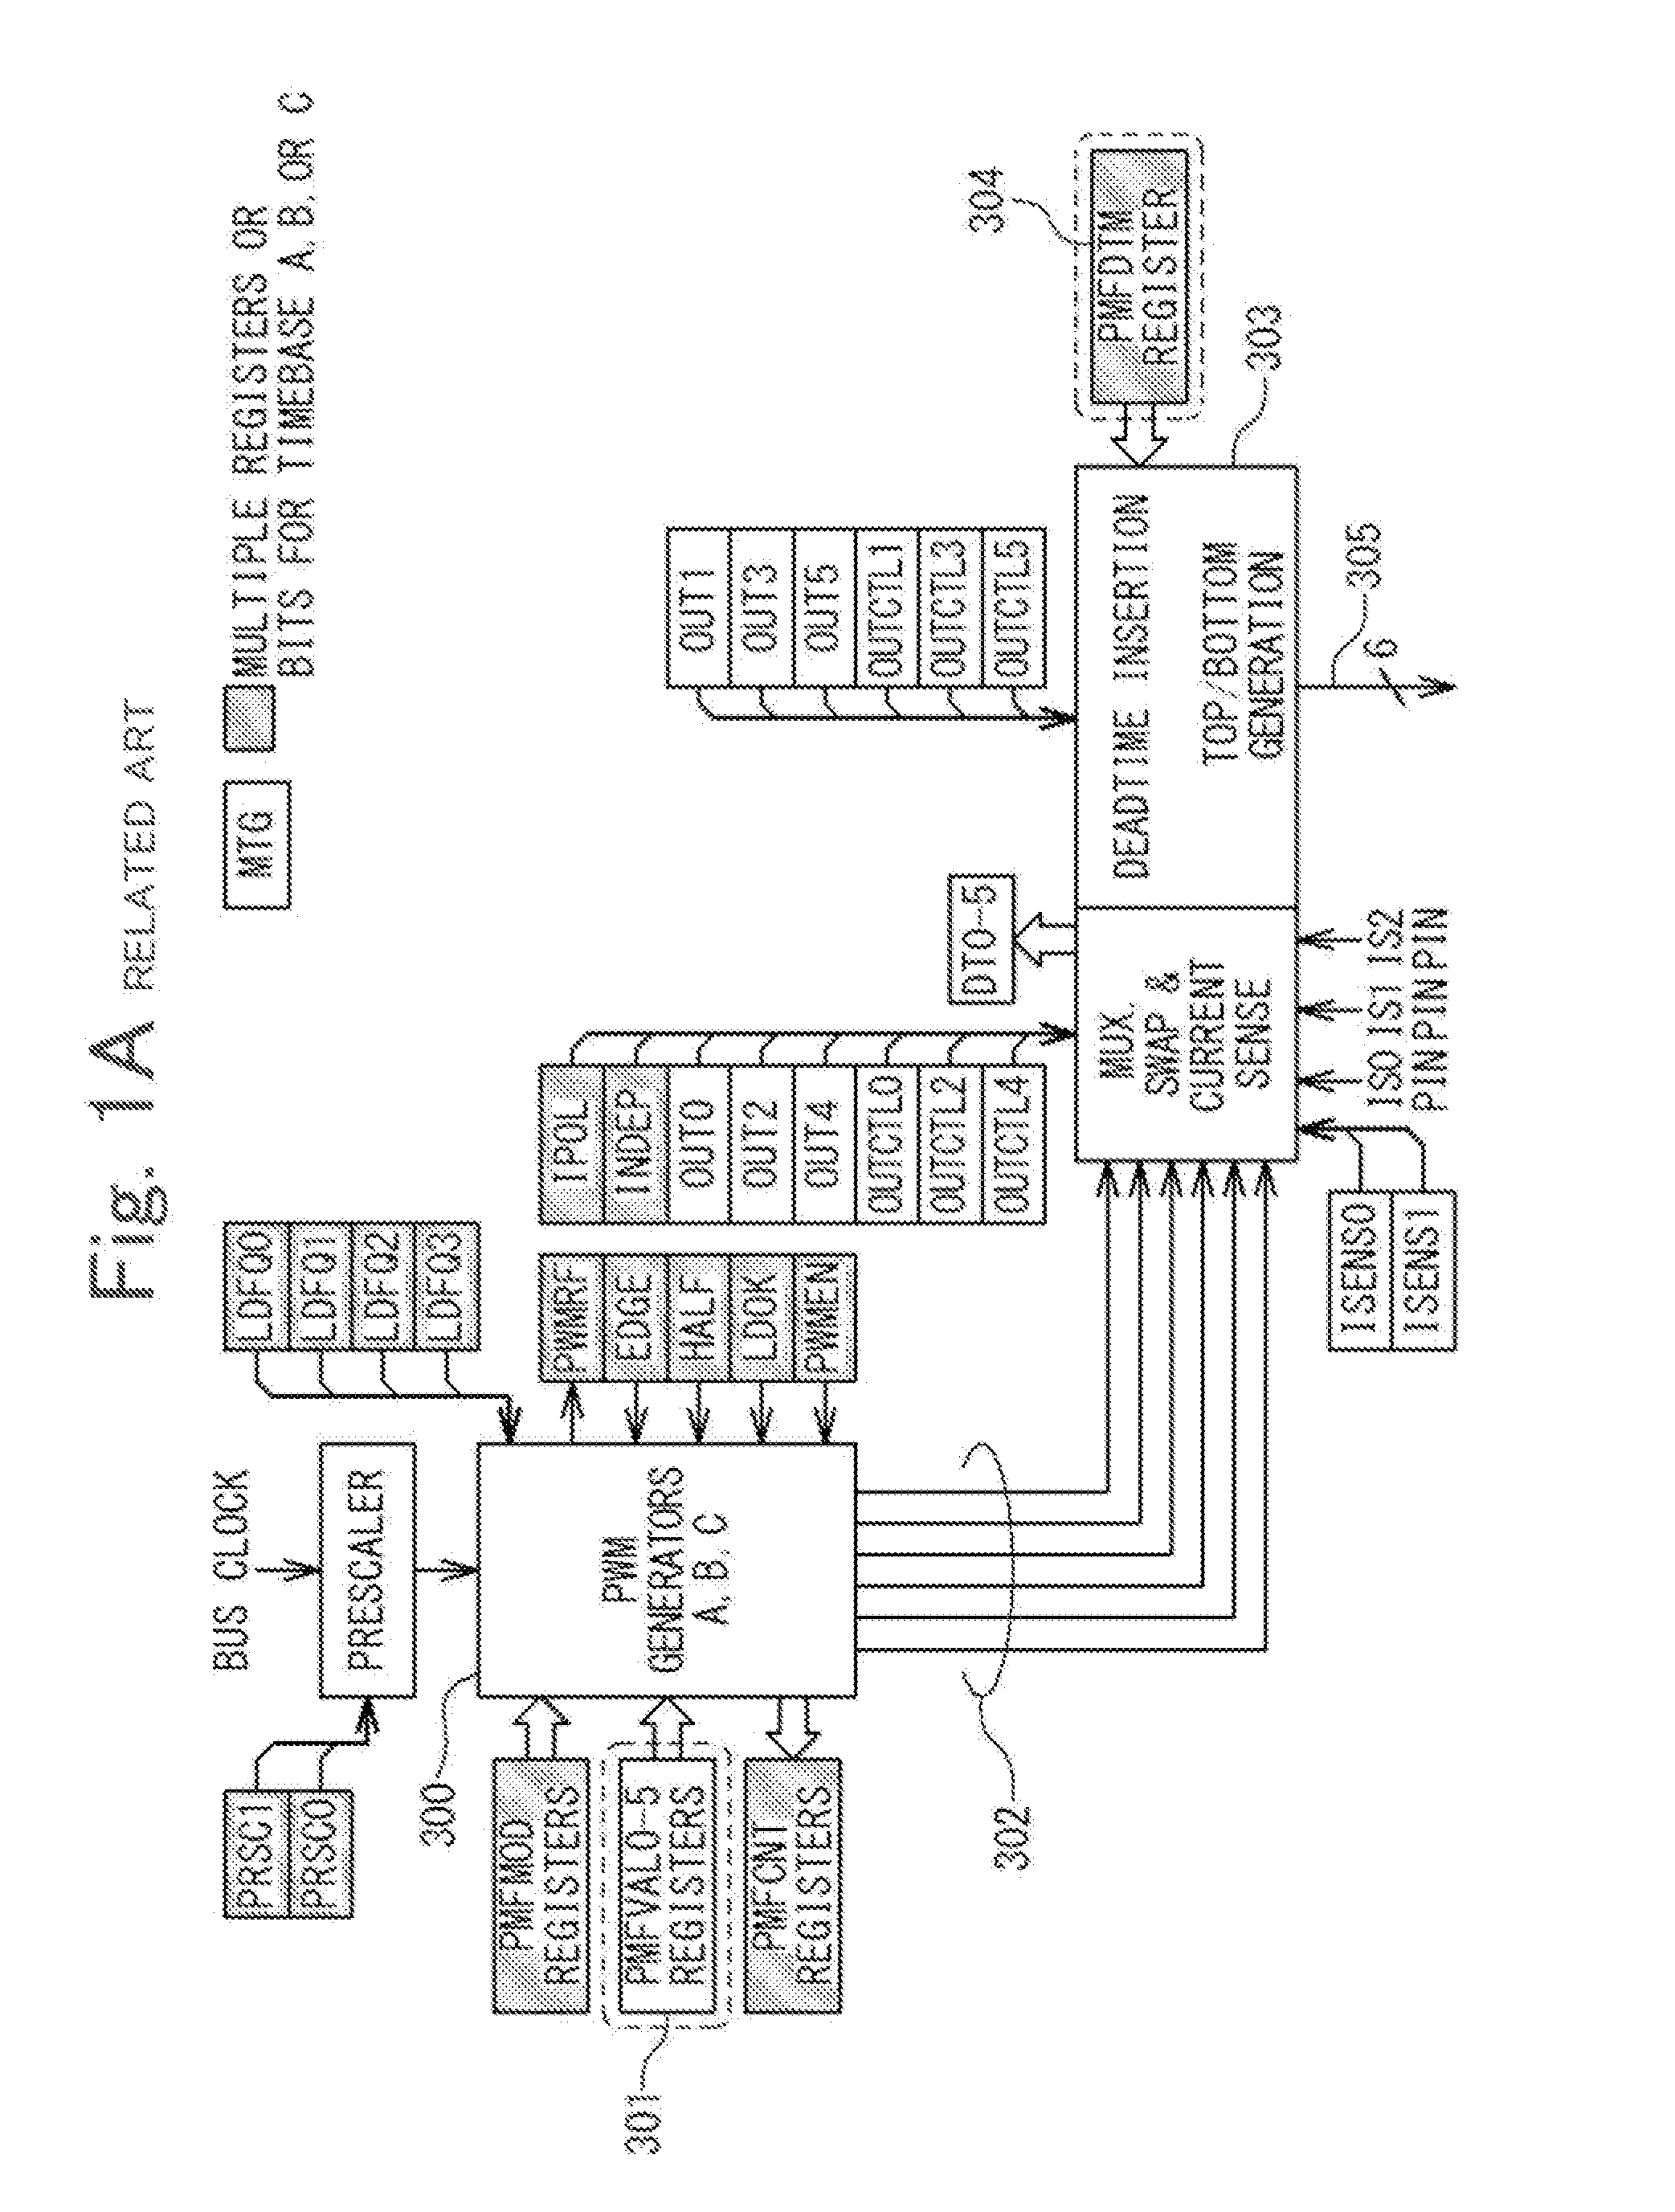 Pwm output apparatus and motor driving apparatus